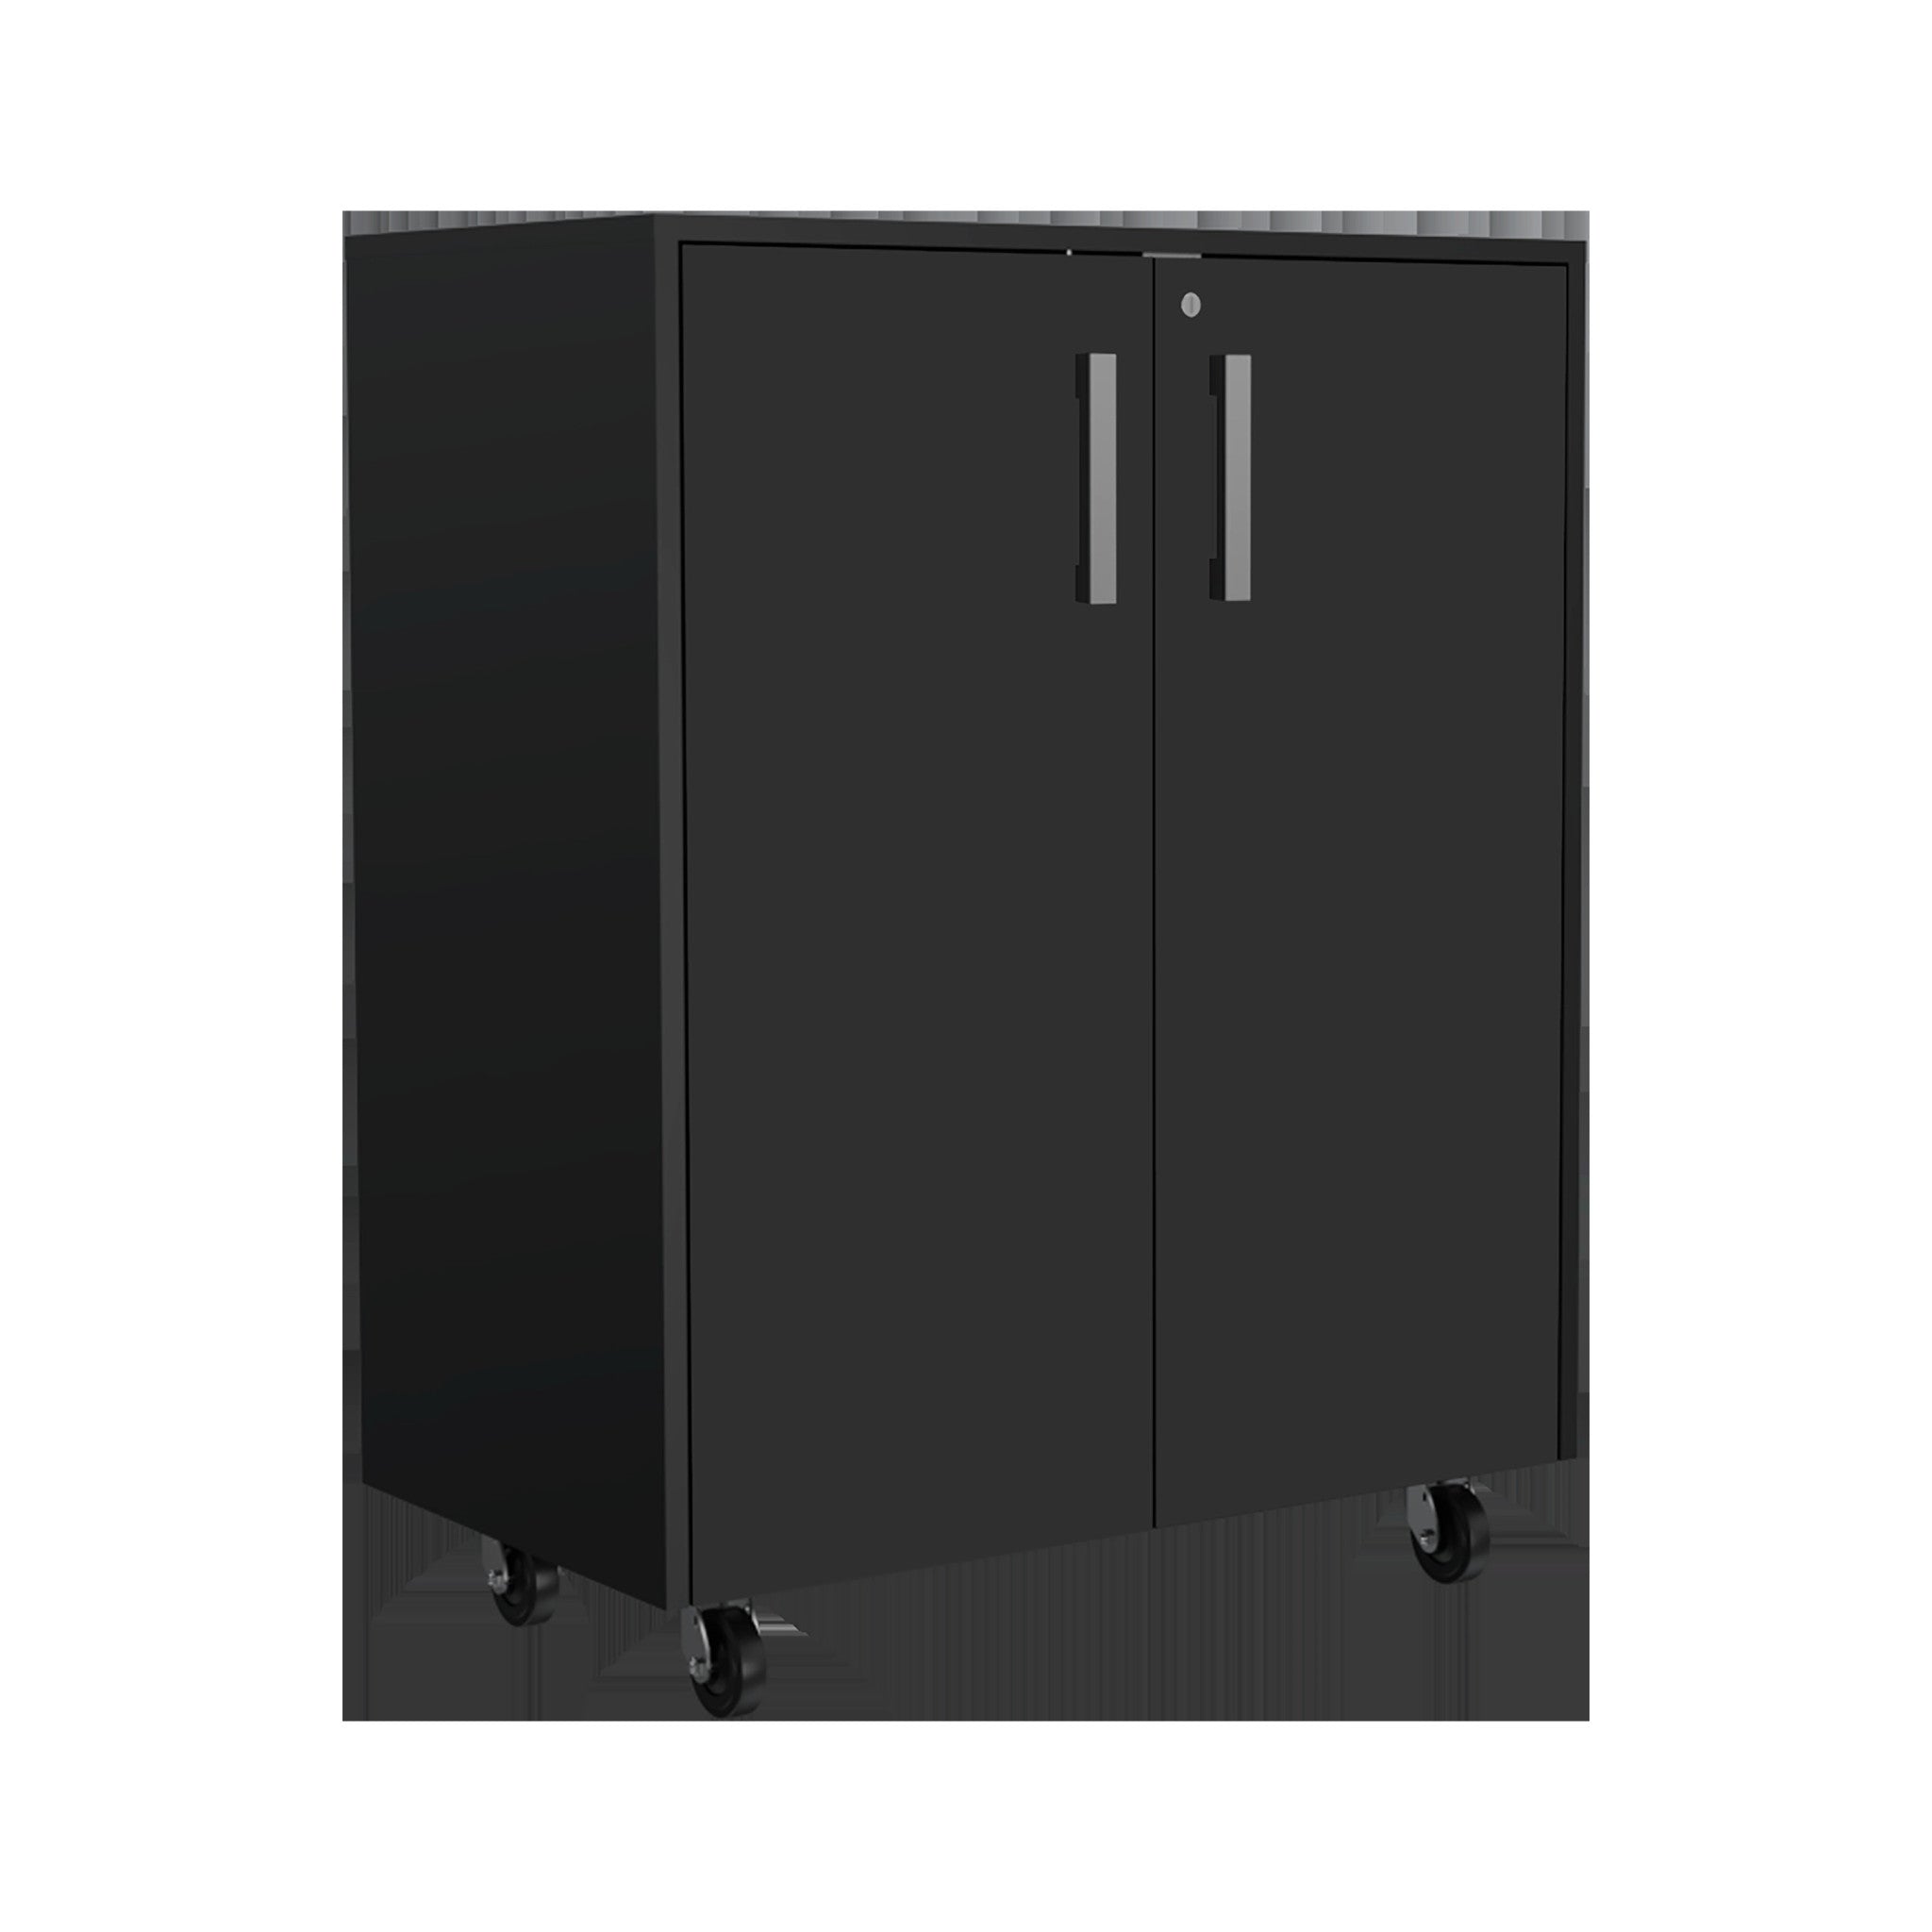 28" Black Wall mounted Accent Cabinet With Six Shelves And Three Drawers